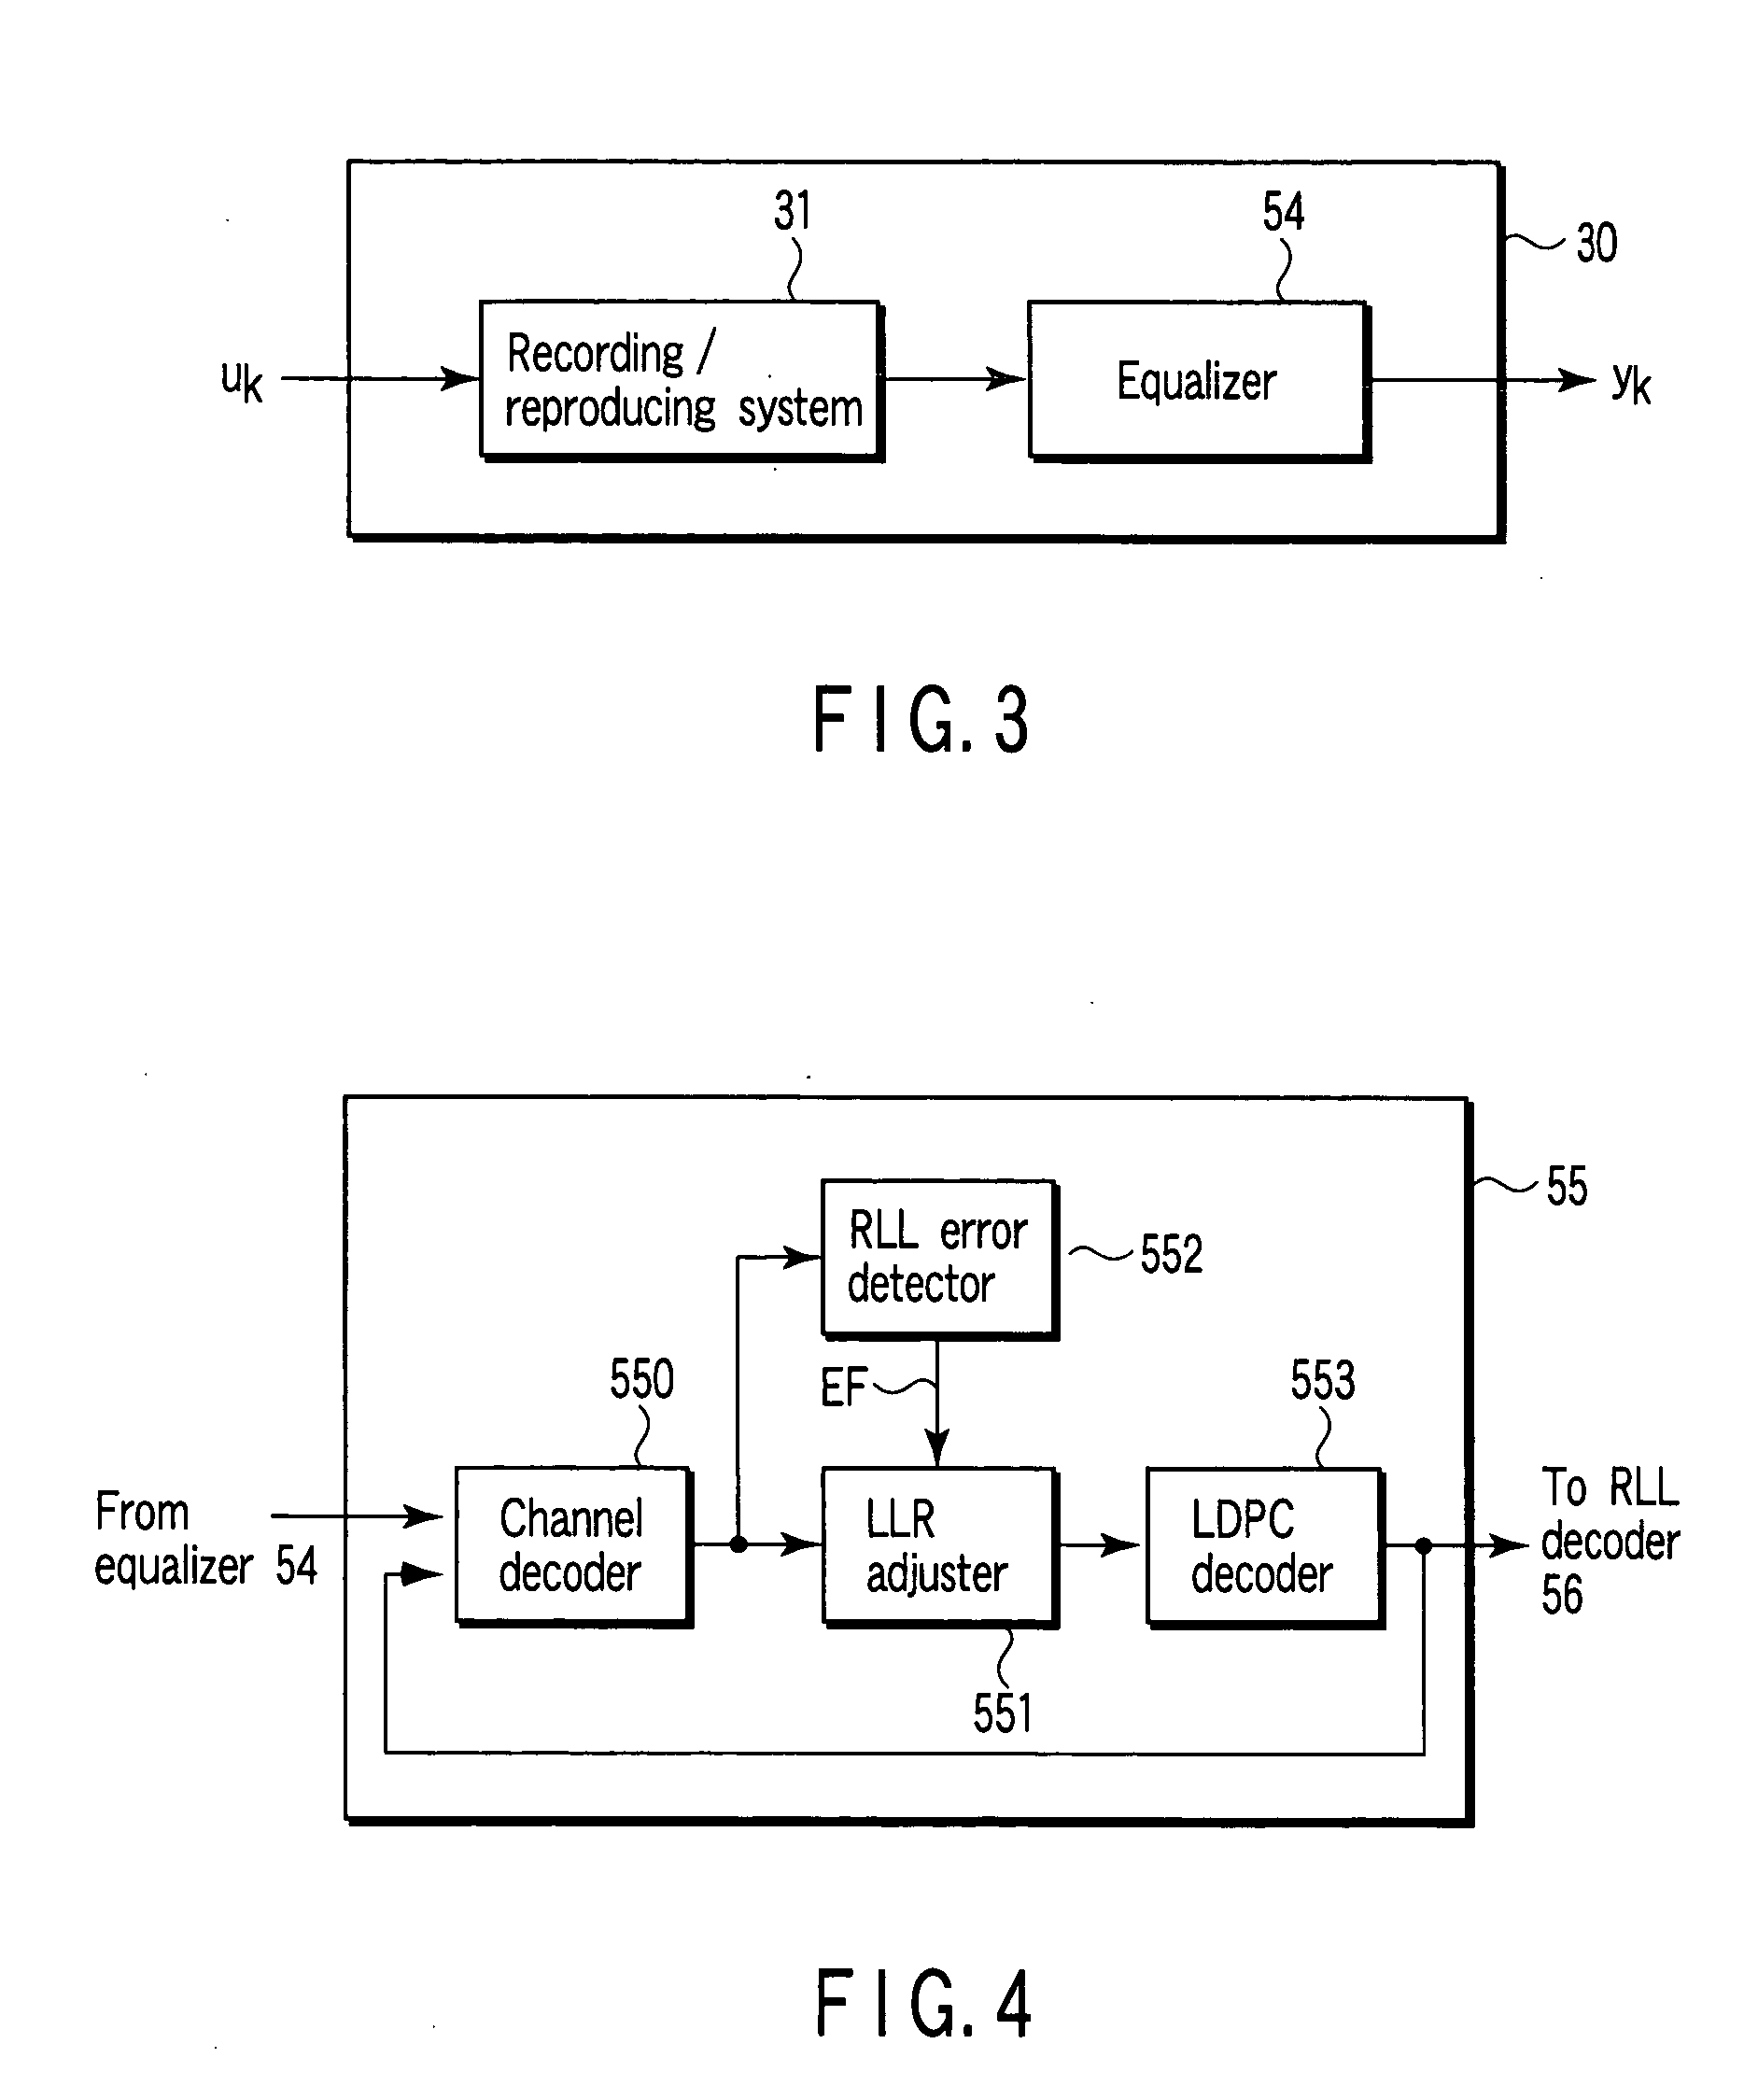 Method and apparatus for data reproducing using iterative decoding in a disk drive